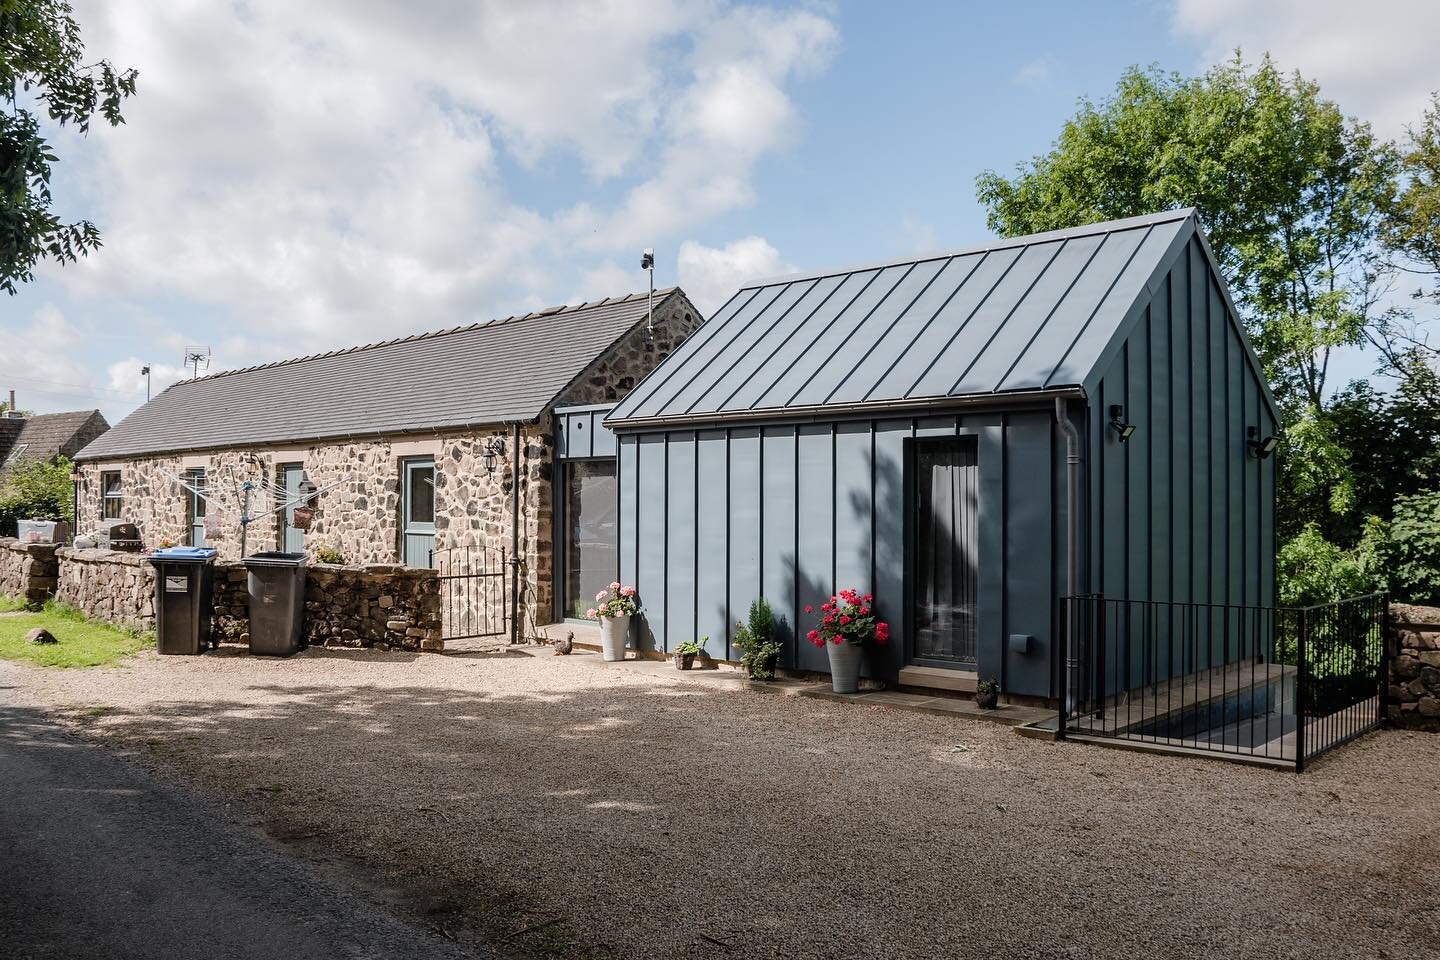 The owners of this compact converted barn were in need of additional space to accommodate their growing family, and they were desperate to stay in the house which is located in a pretty hamlet. Through discussions with the Local Planning Authority wh